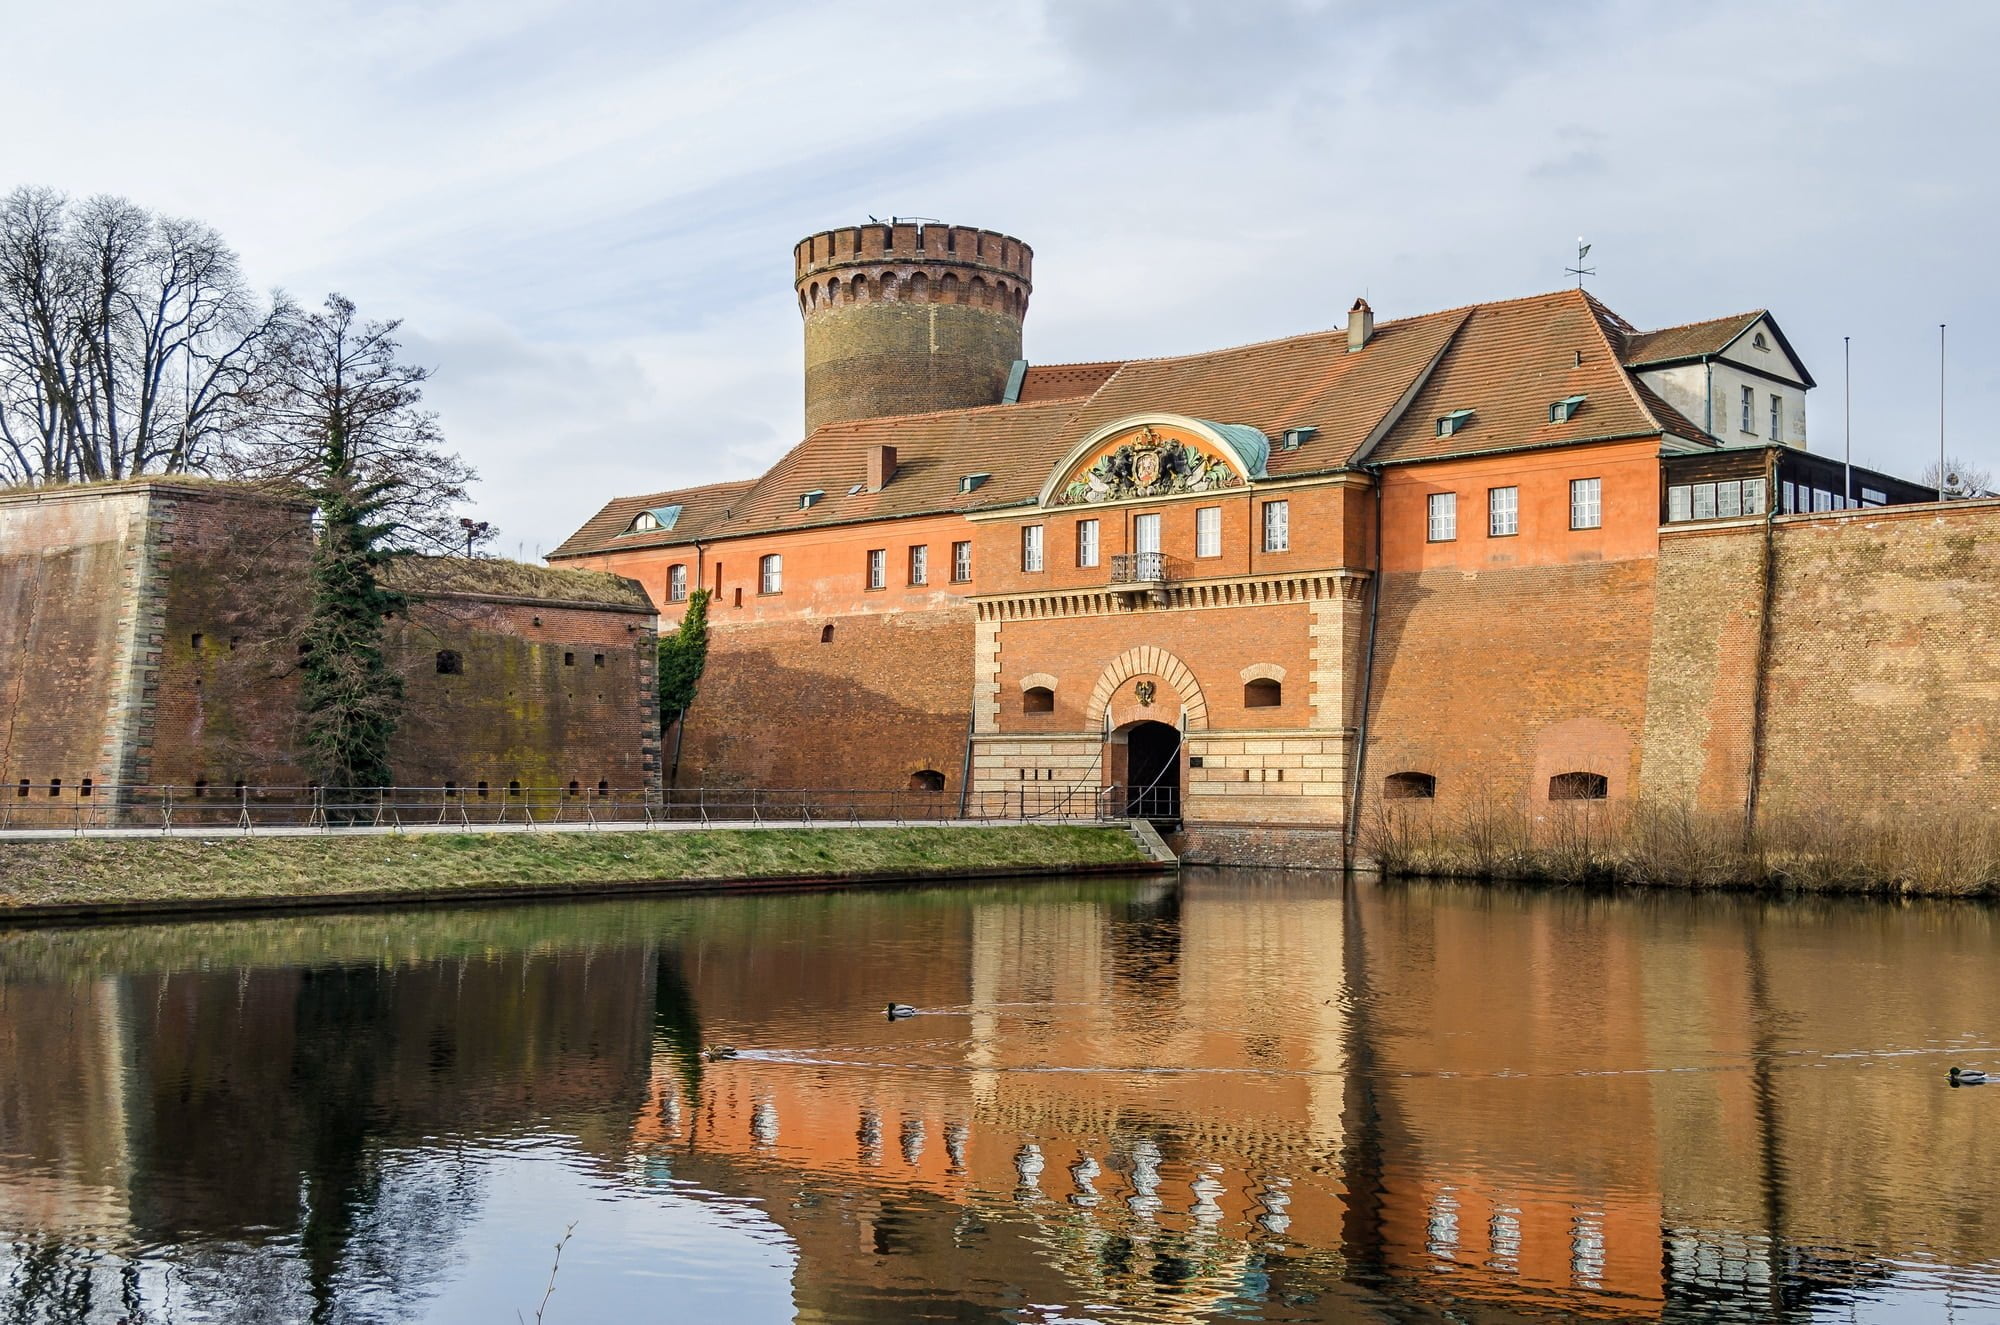 Spandau Citadel, one of the best preserved Renaissance military structures of Europe, now a museum. The part of the bastion Koenig (king bastion) with the Julius tower and the gate house with a draw bridge, now the main public entrance.